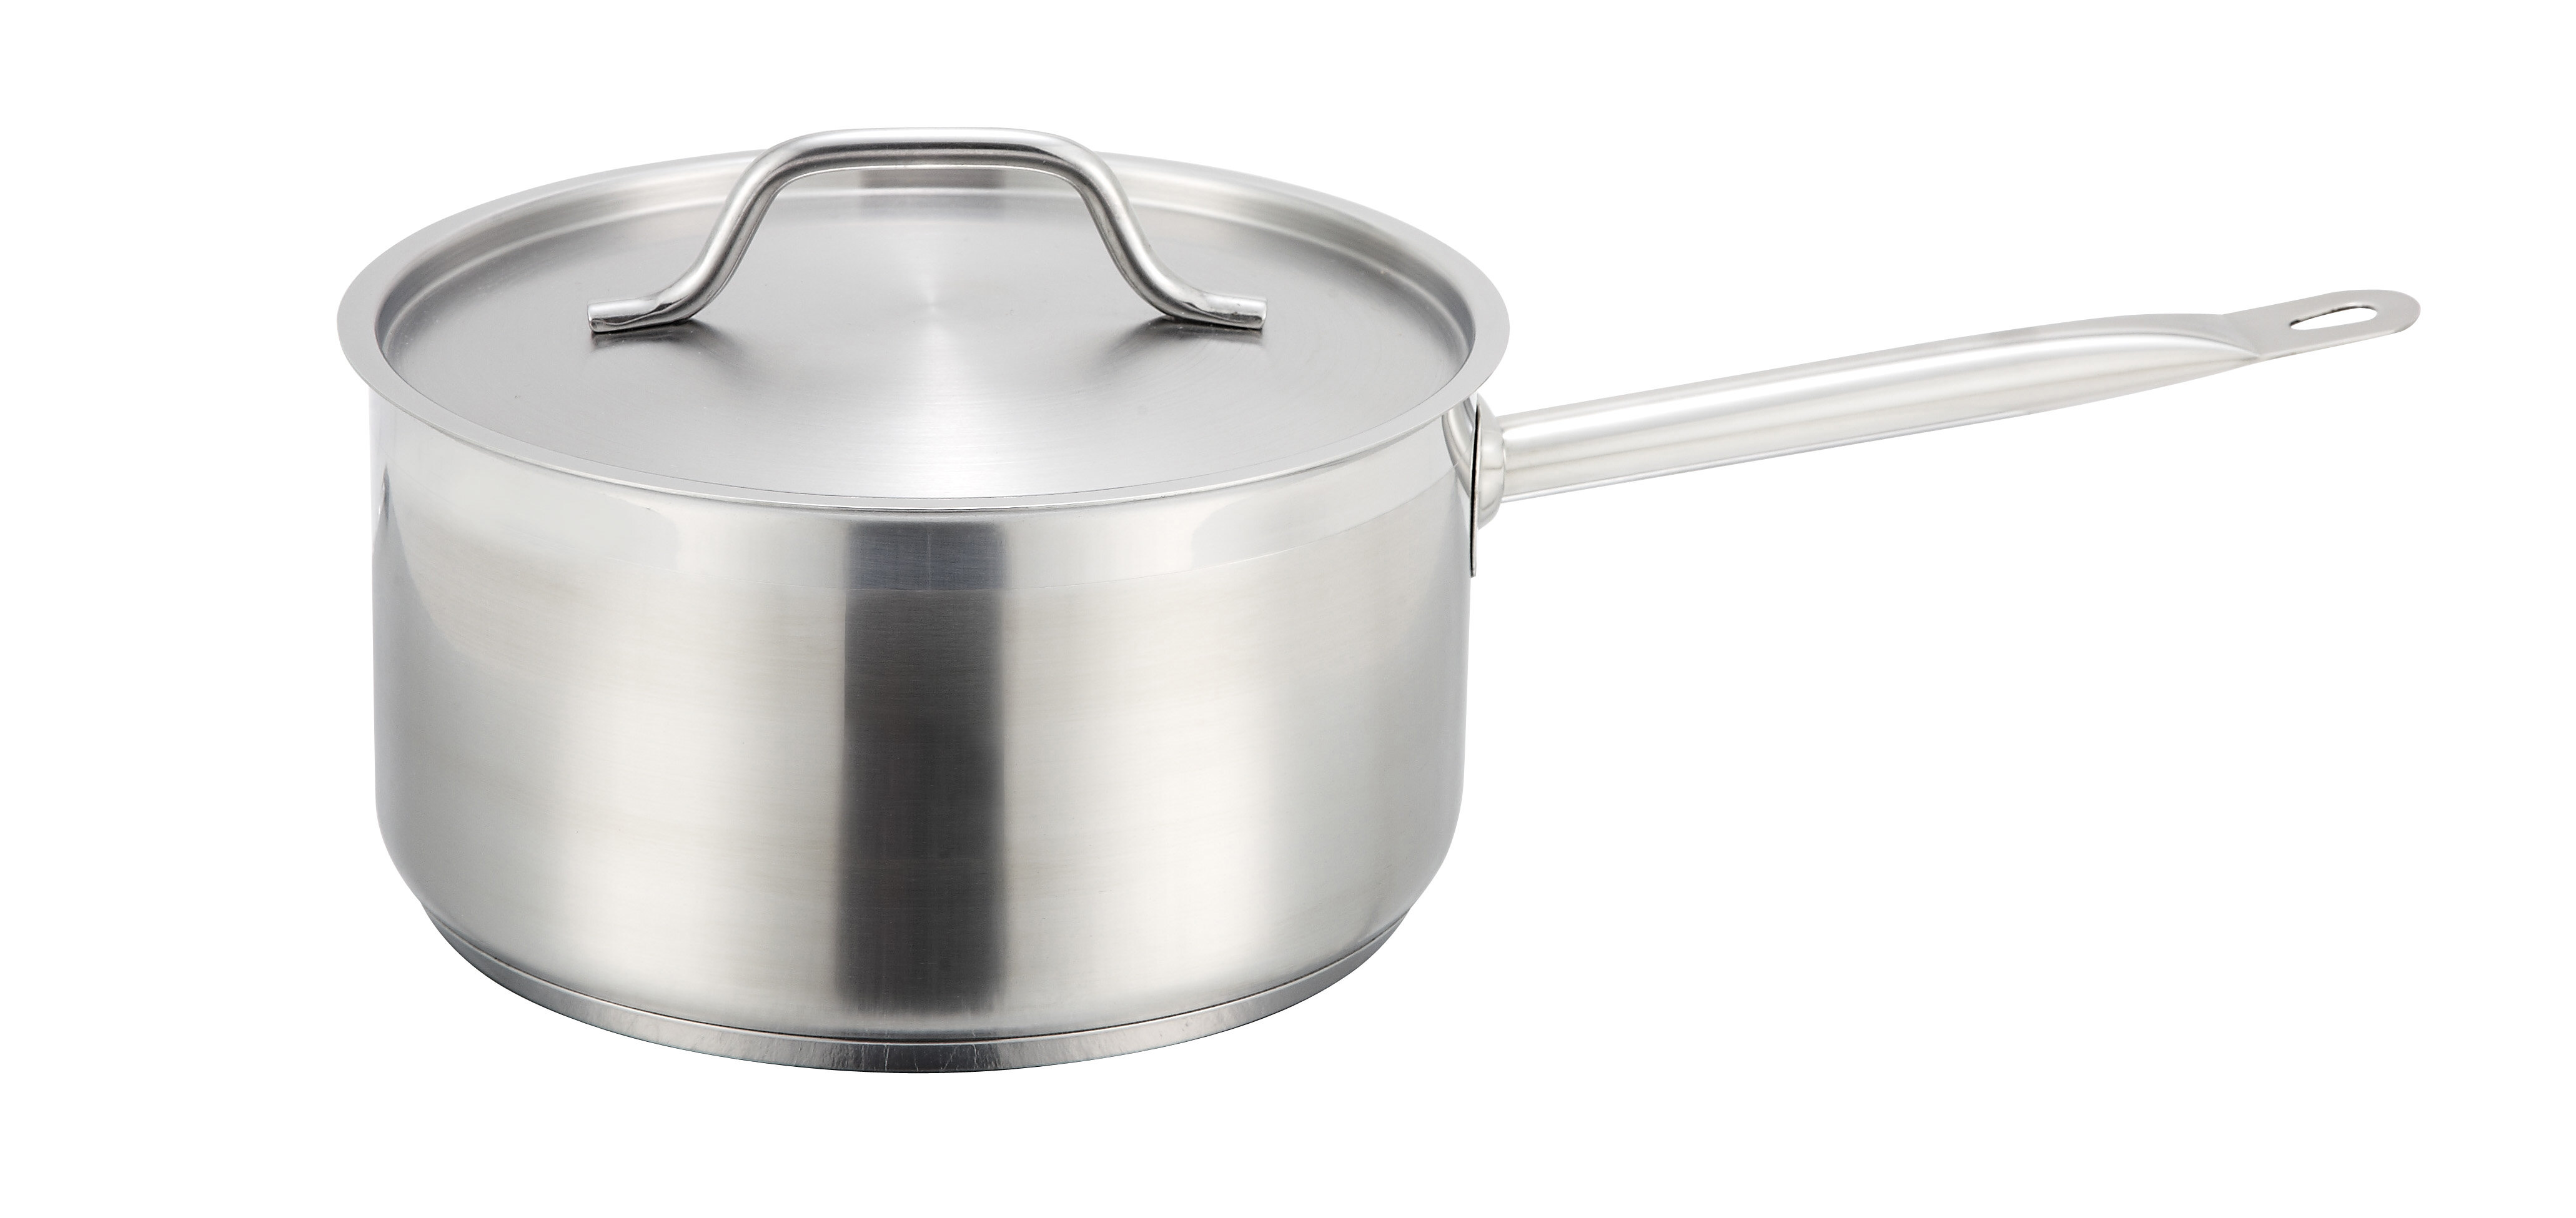  Winware Stainless Steel 32 Quart Stock Pot with Cover